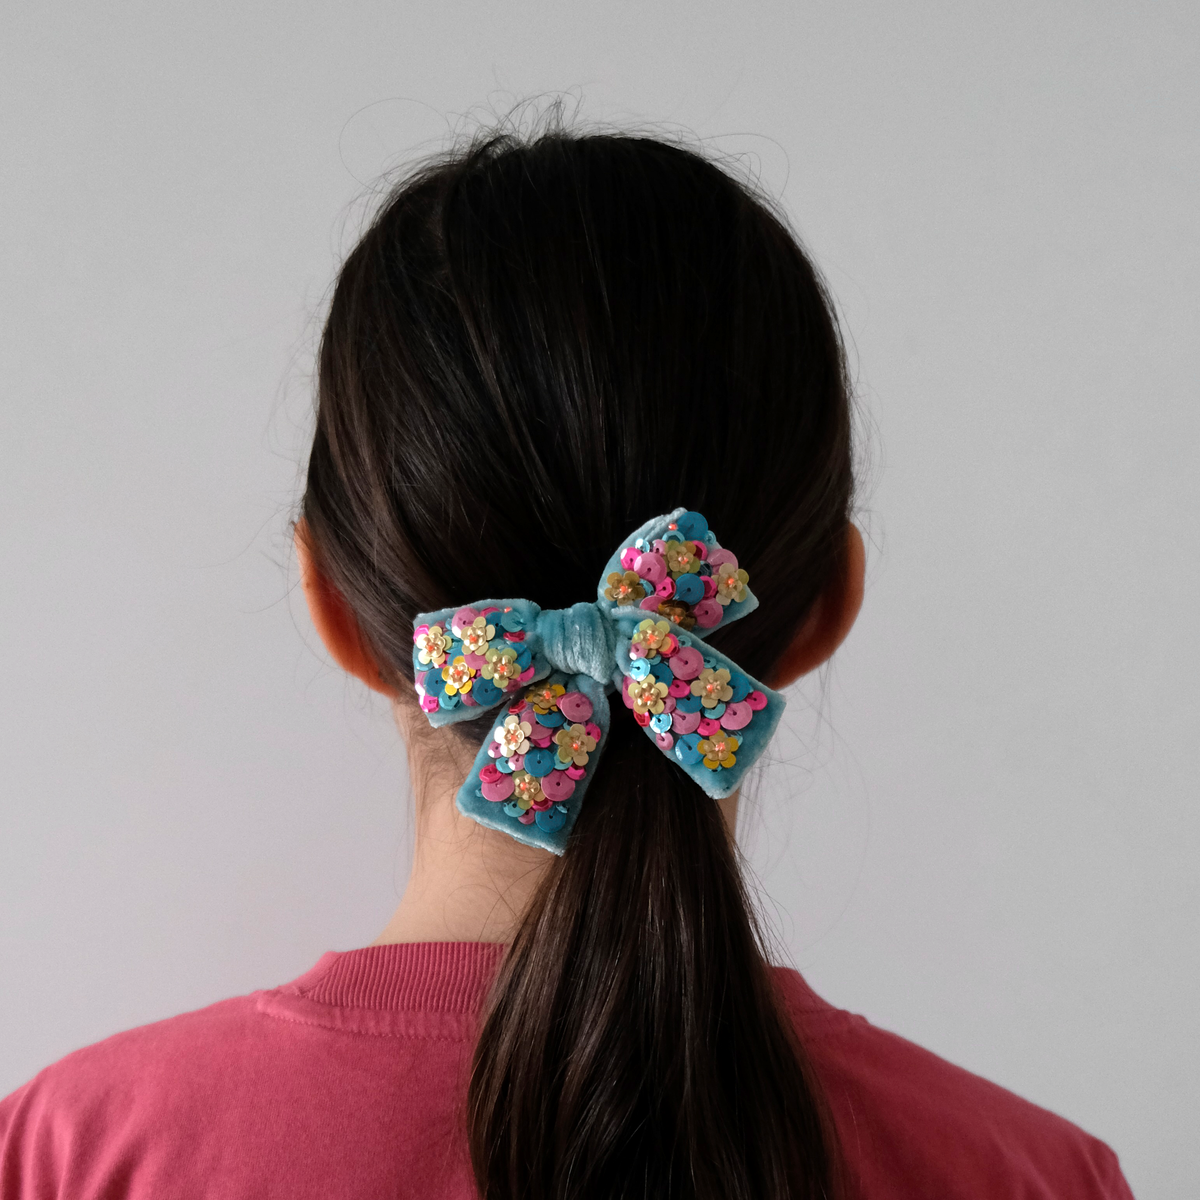 This sequins embellished turquoise silk velvet bow looks fabulous attached to a pony tail!  